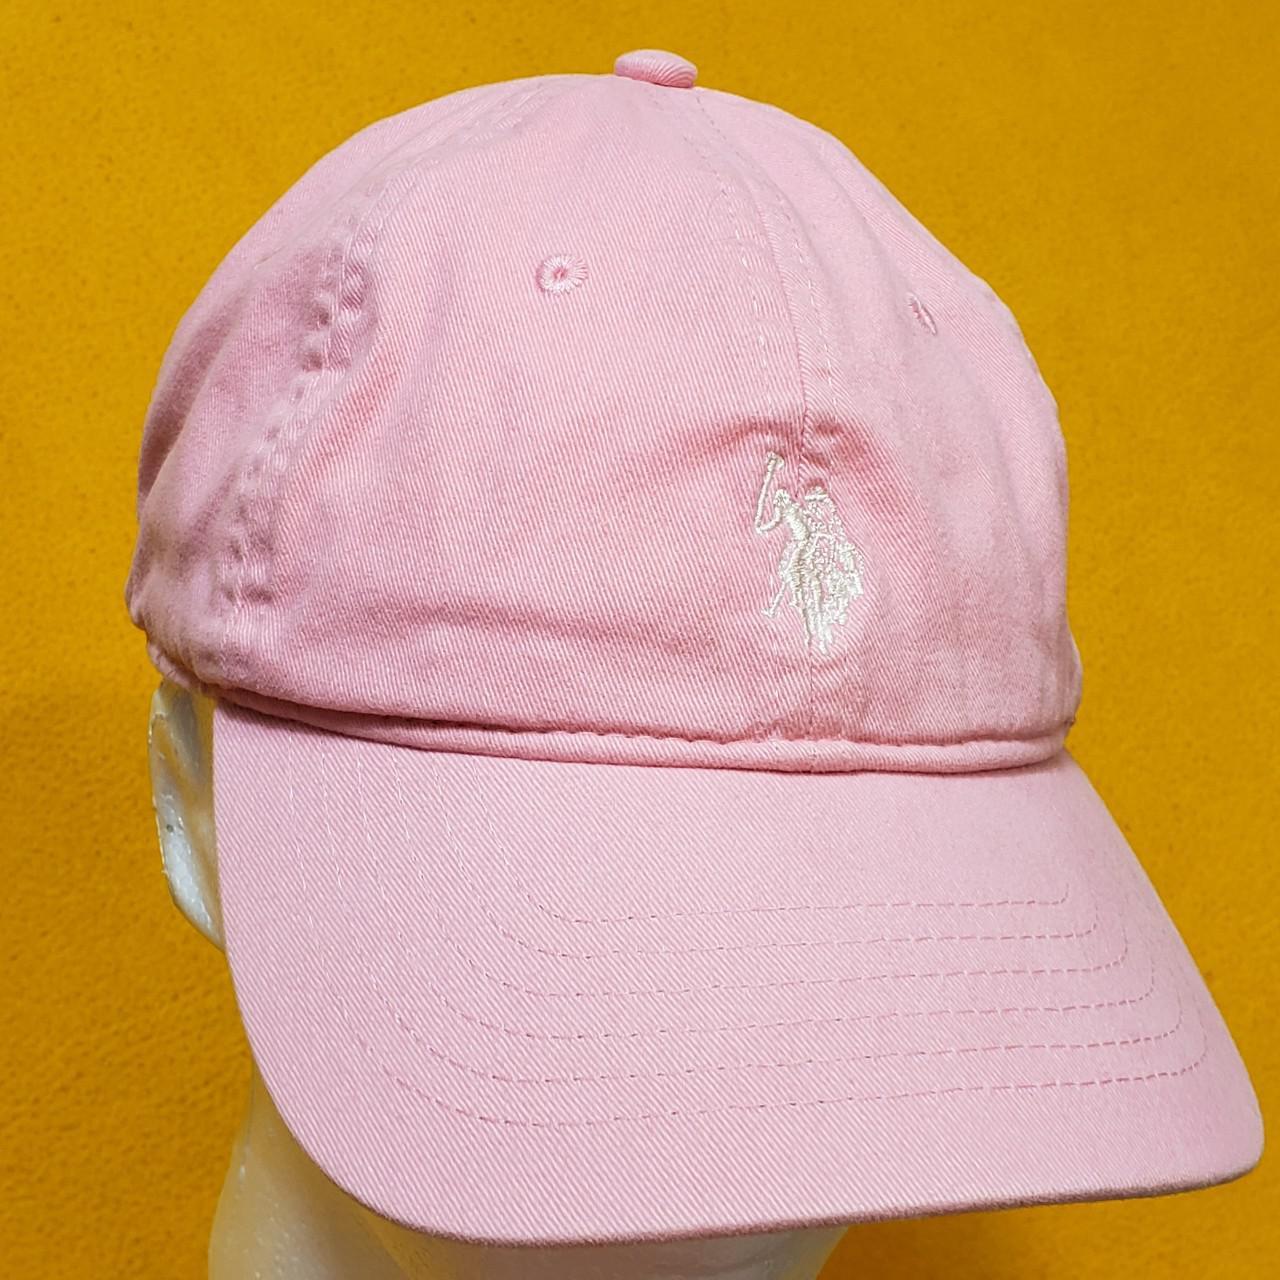 U.S. Polo Assn. Men's Pink and White Hat